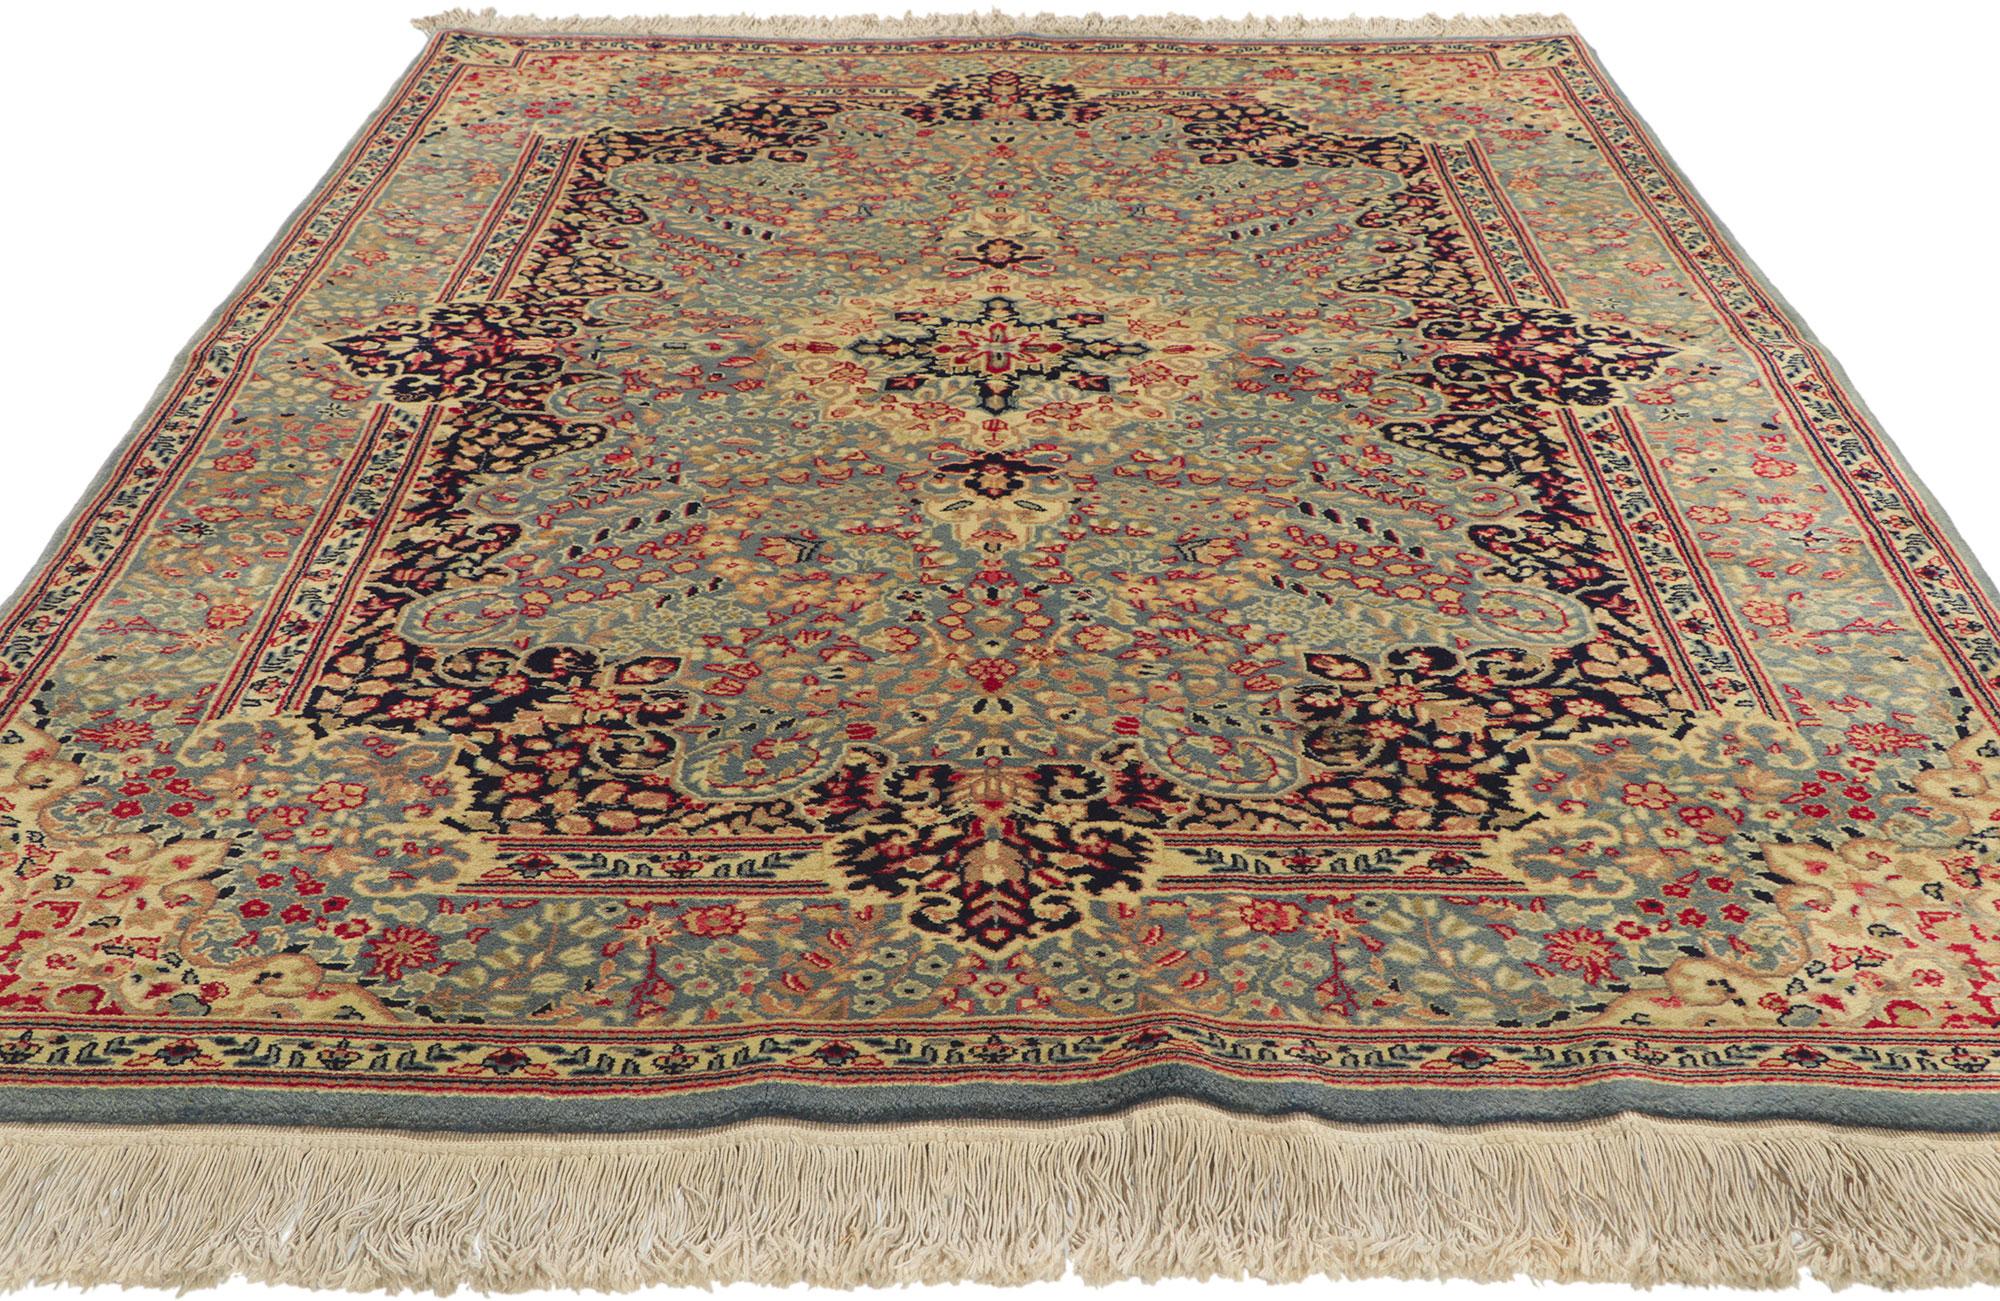 Wool Antique Persian Kerman Rug with Decorative Elegance For Sale